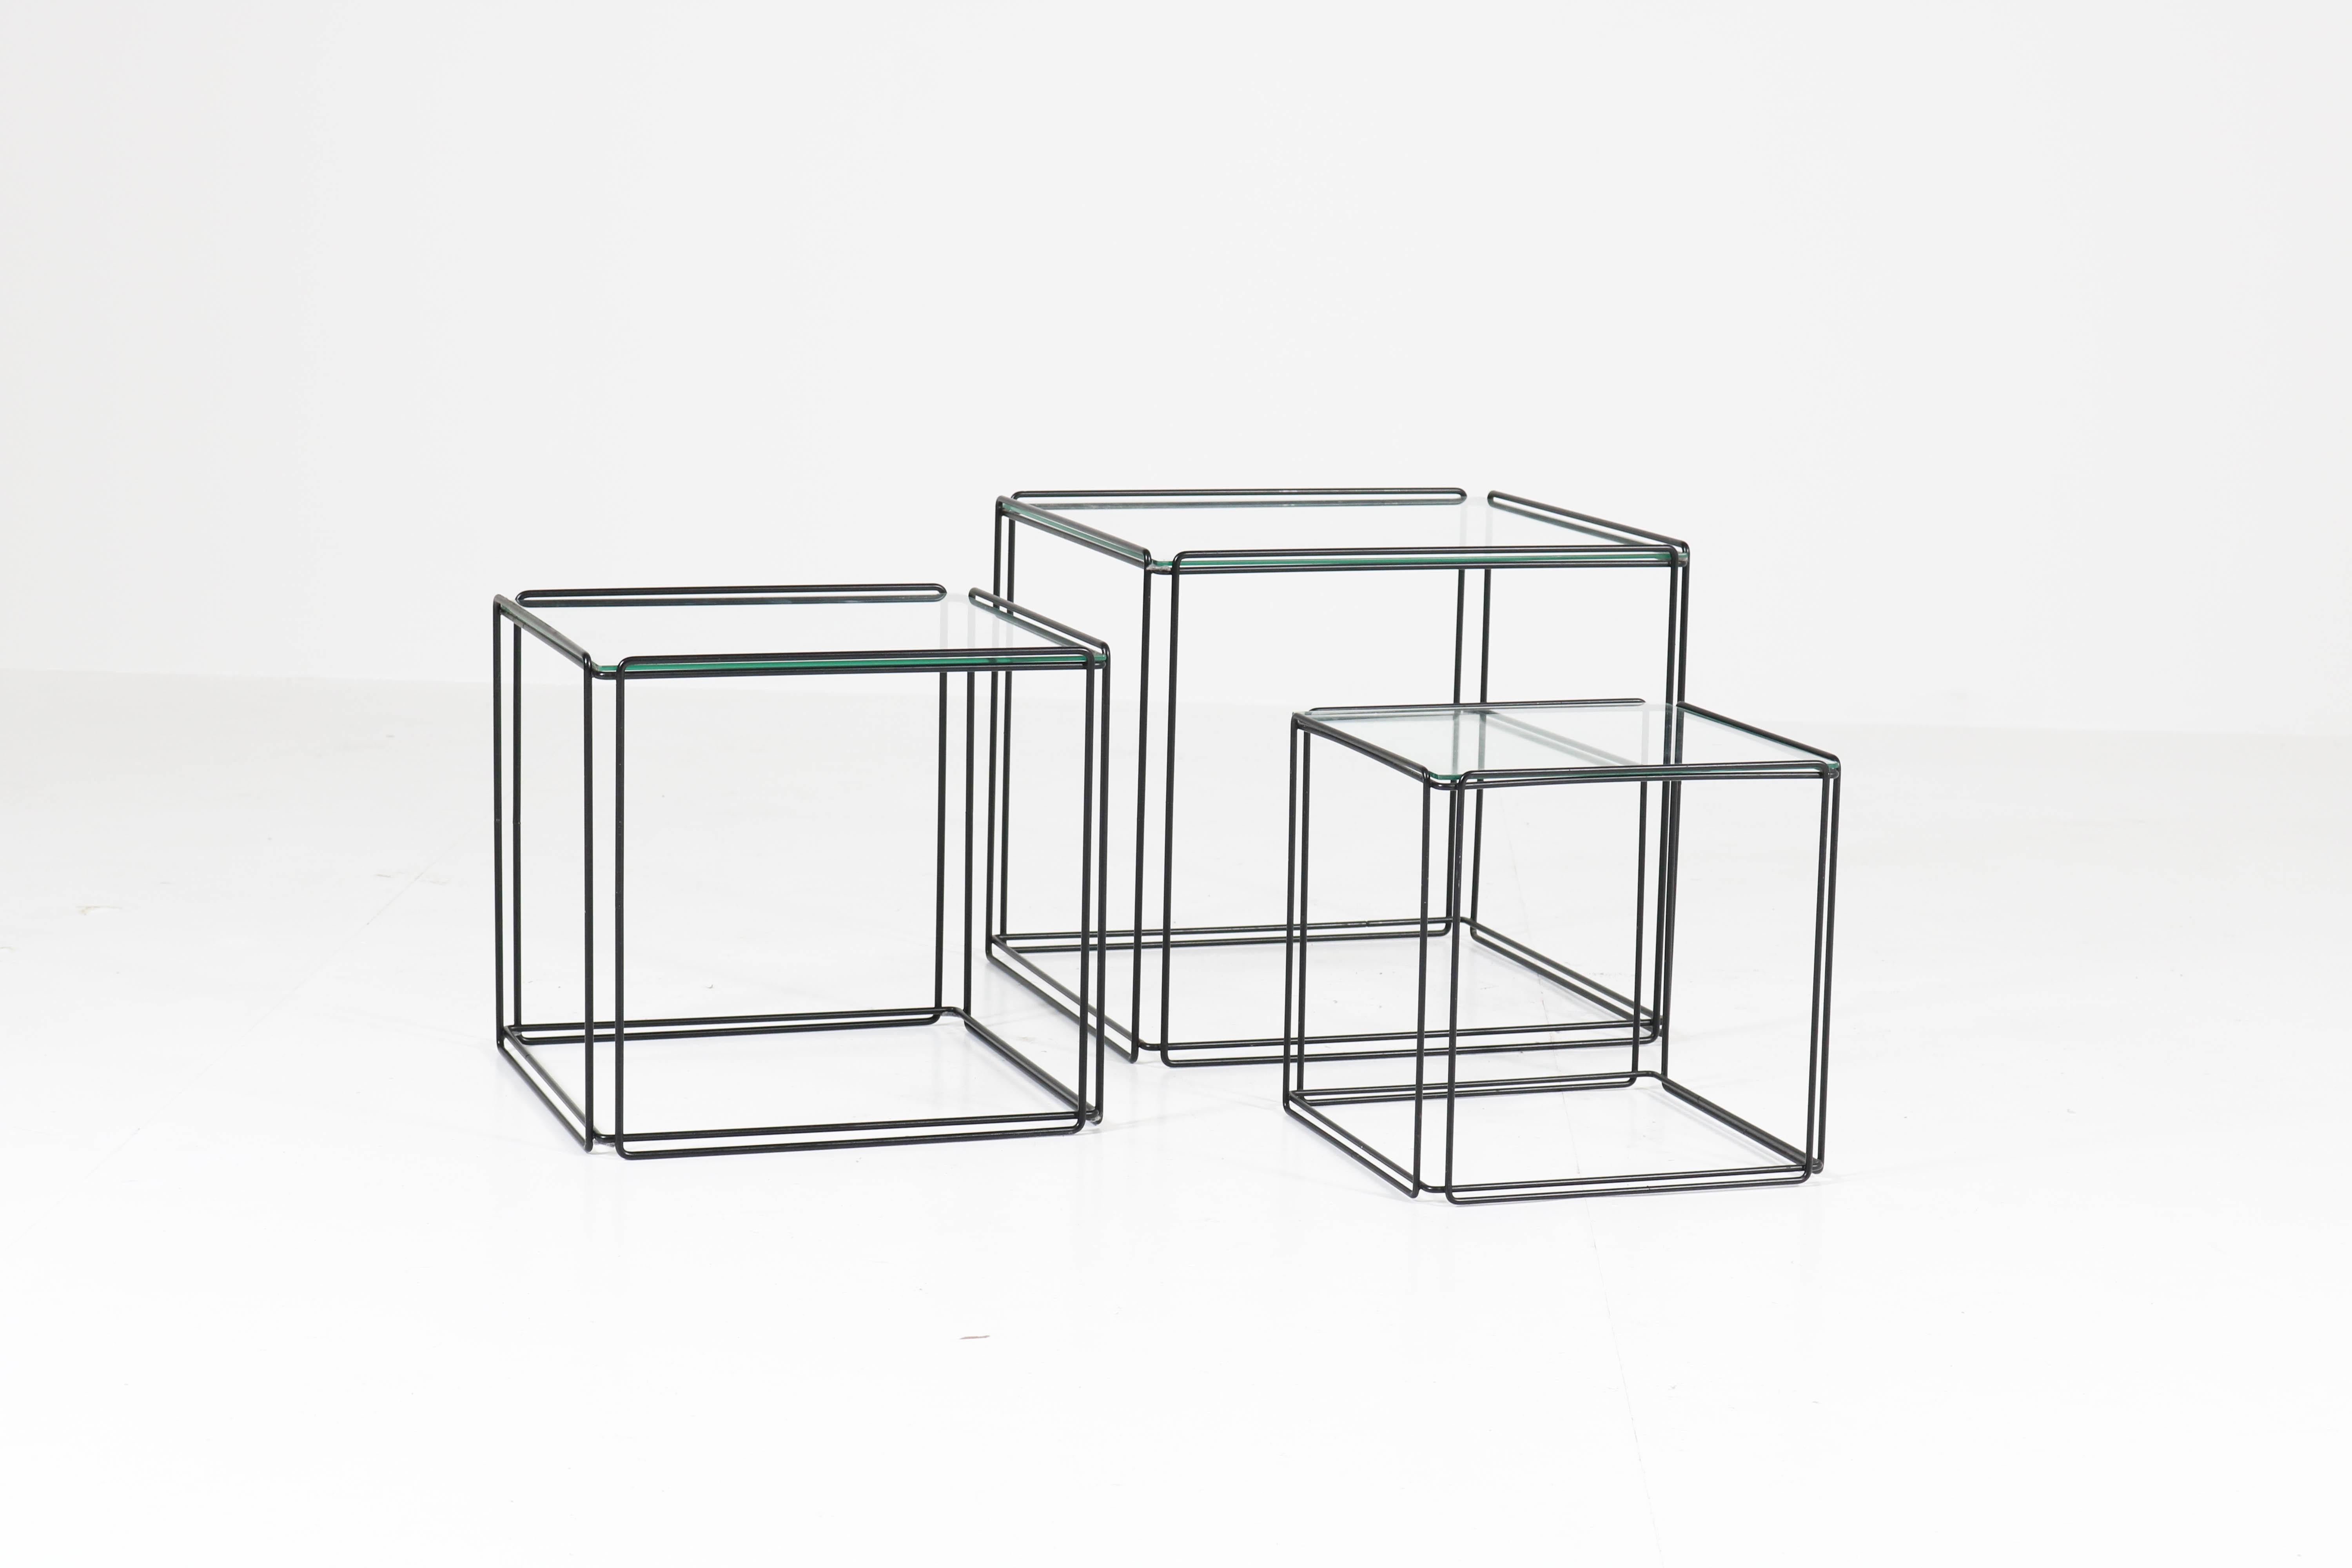 Late 20th Century Mid-Century Modern Metal and Glass Nesting Tables by Max Sauze, 1970s